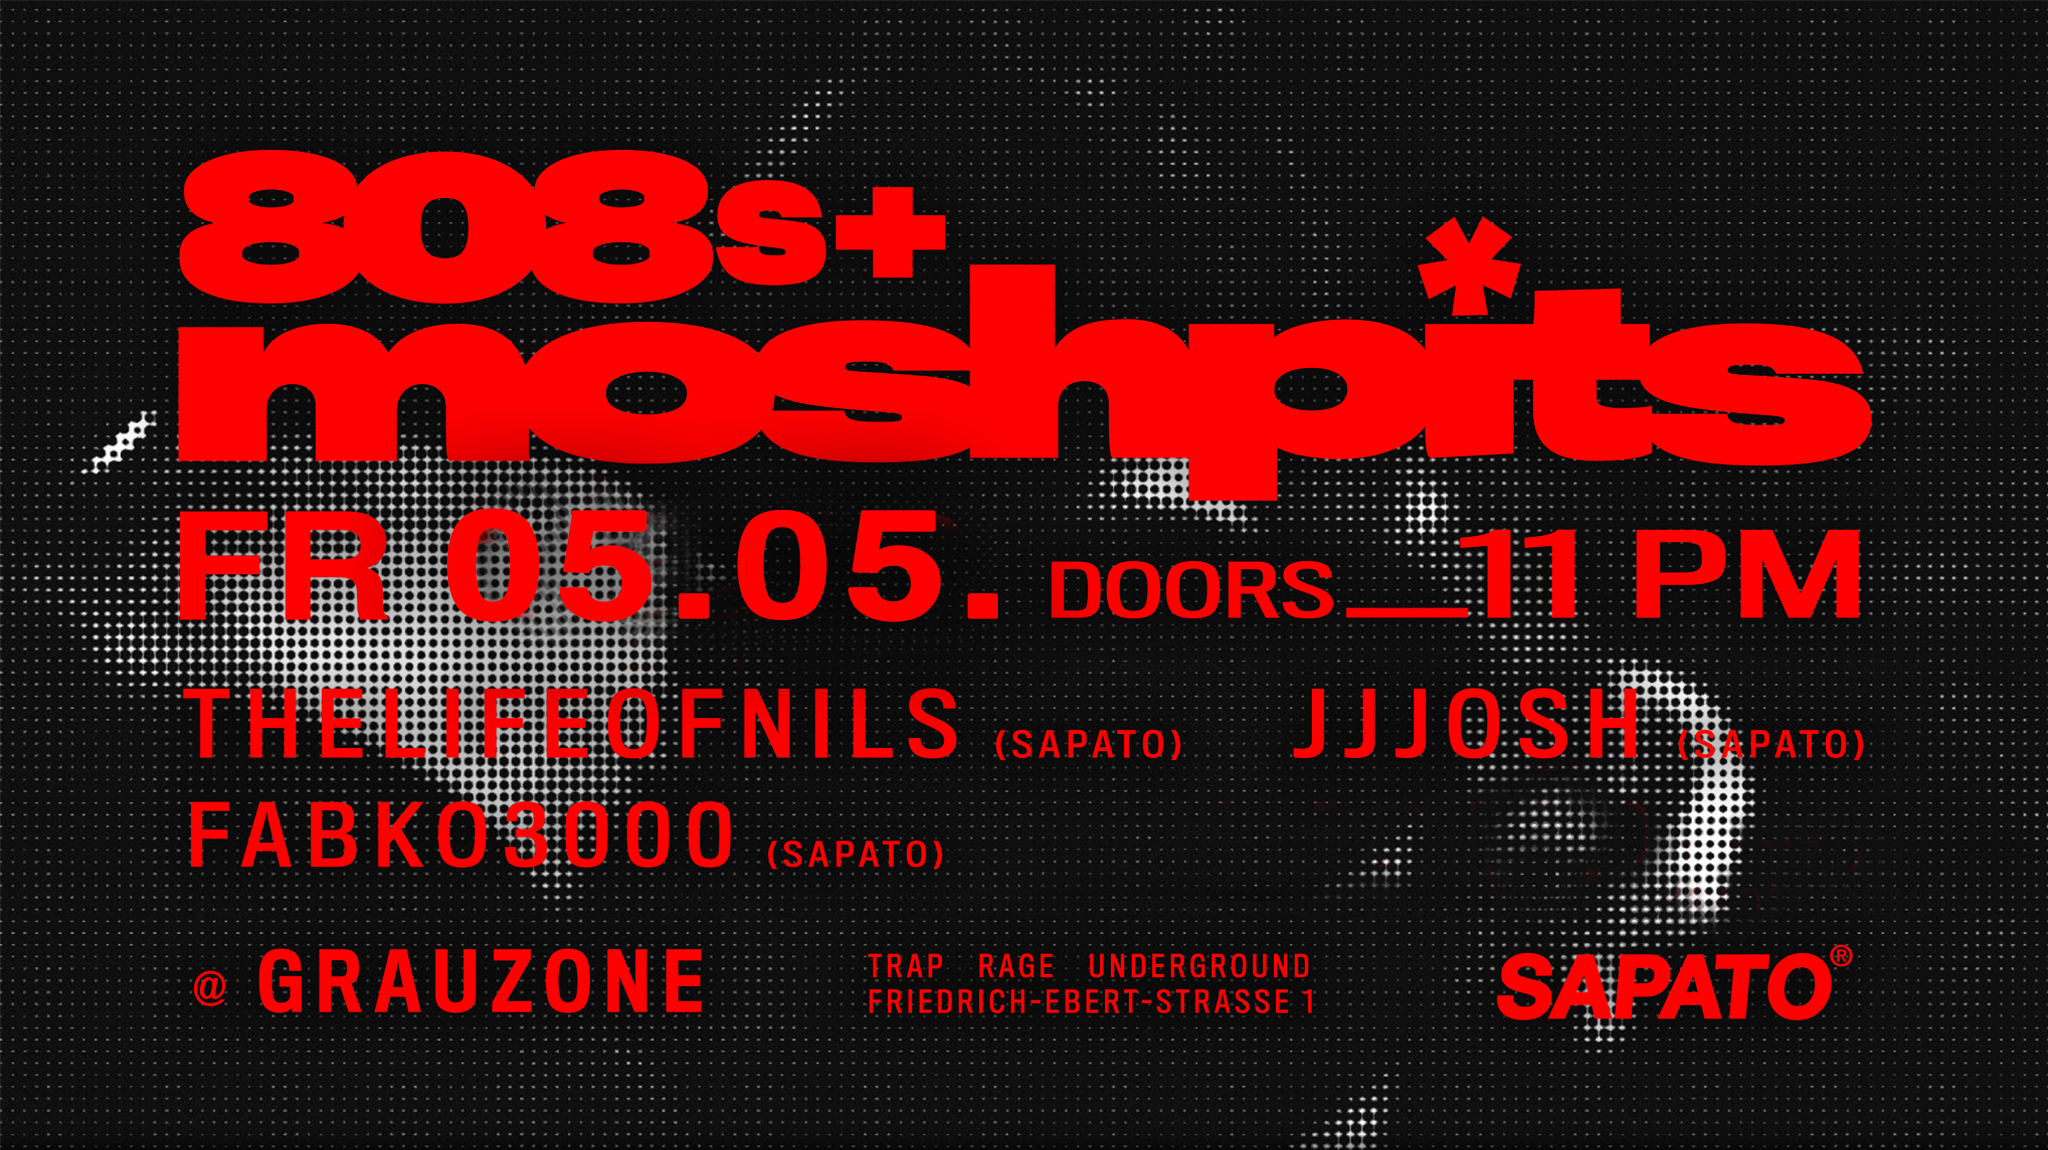 808s+moshpits facebook banner 05-05-23